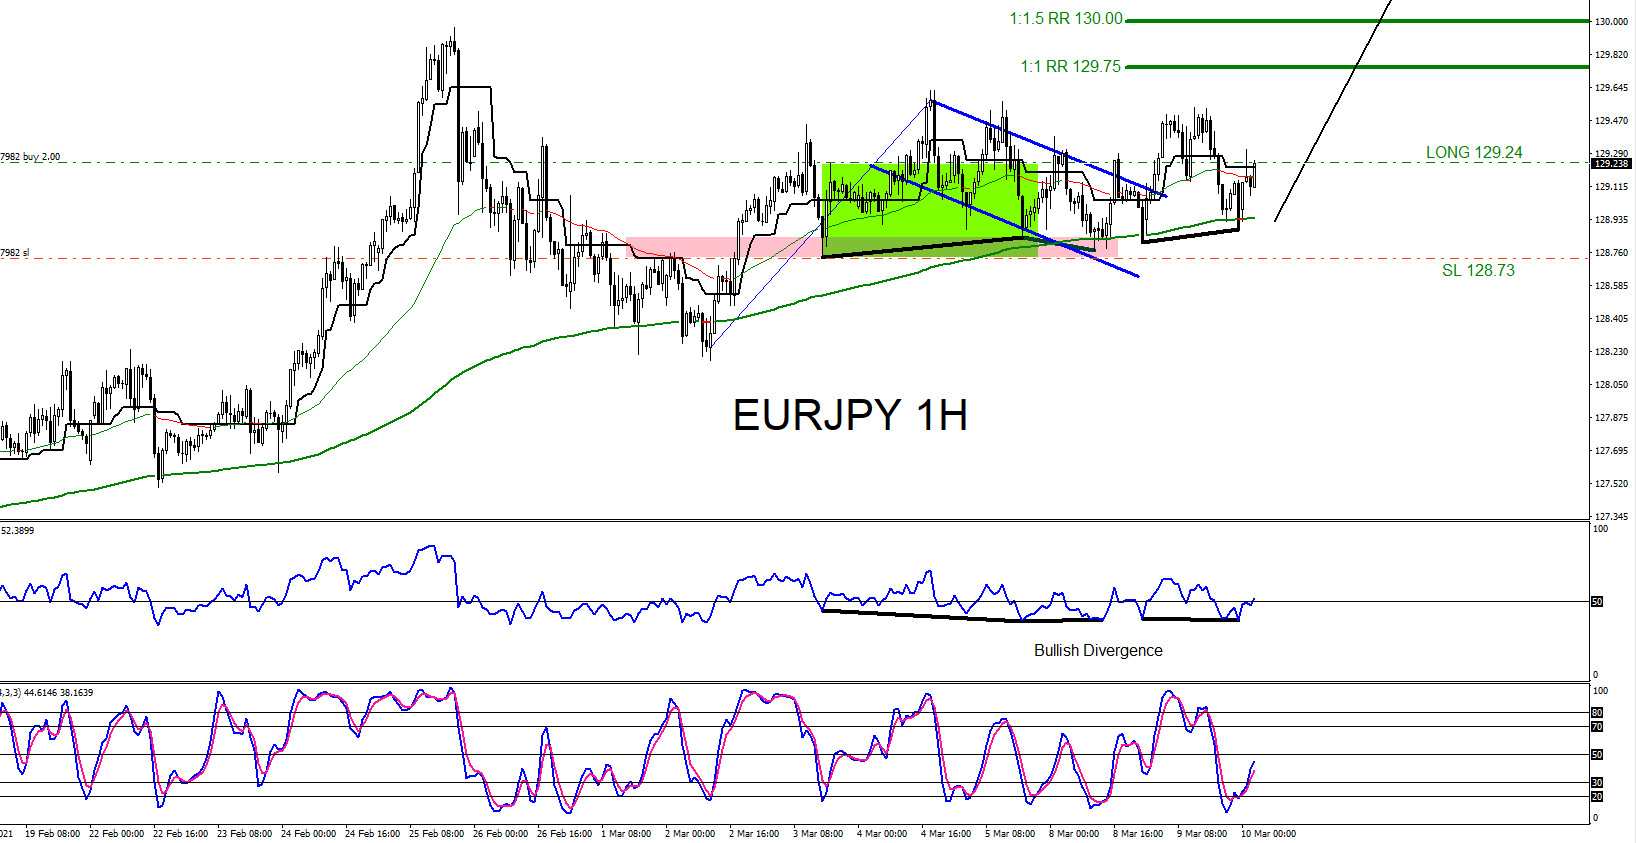 EURJPY : Catching the Move Higher